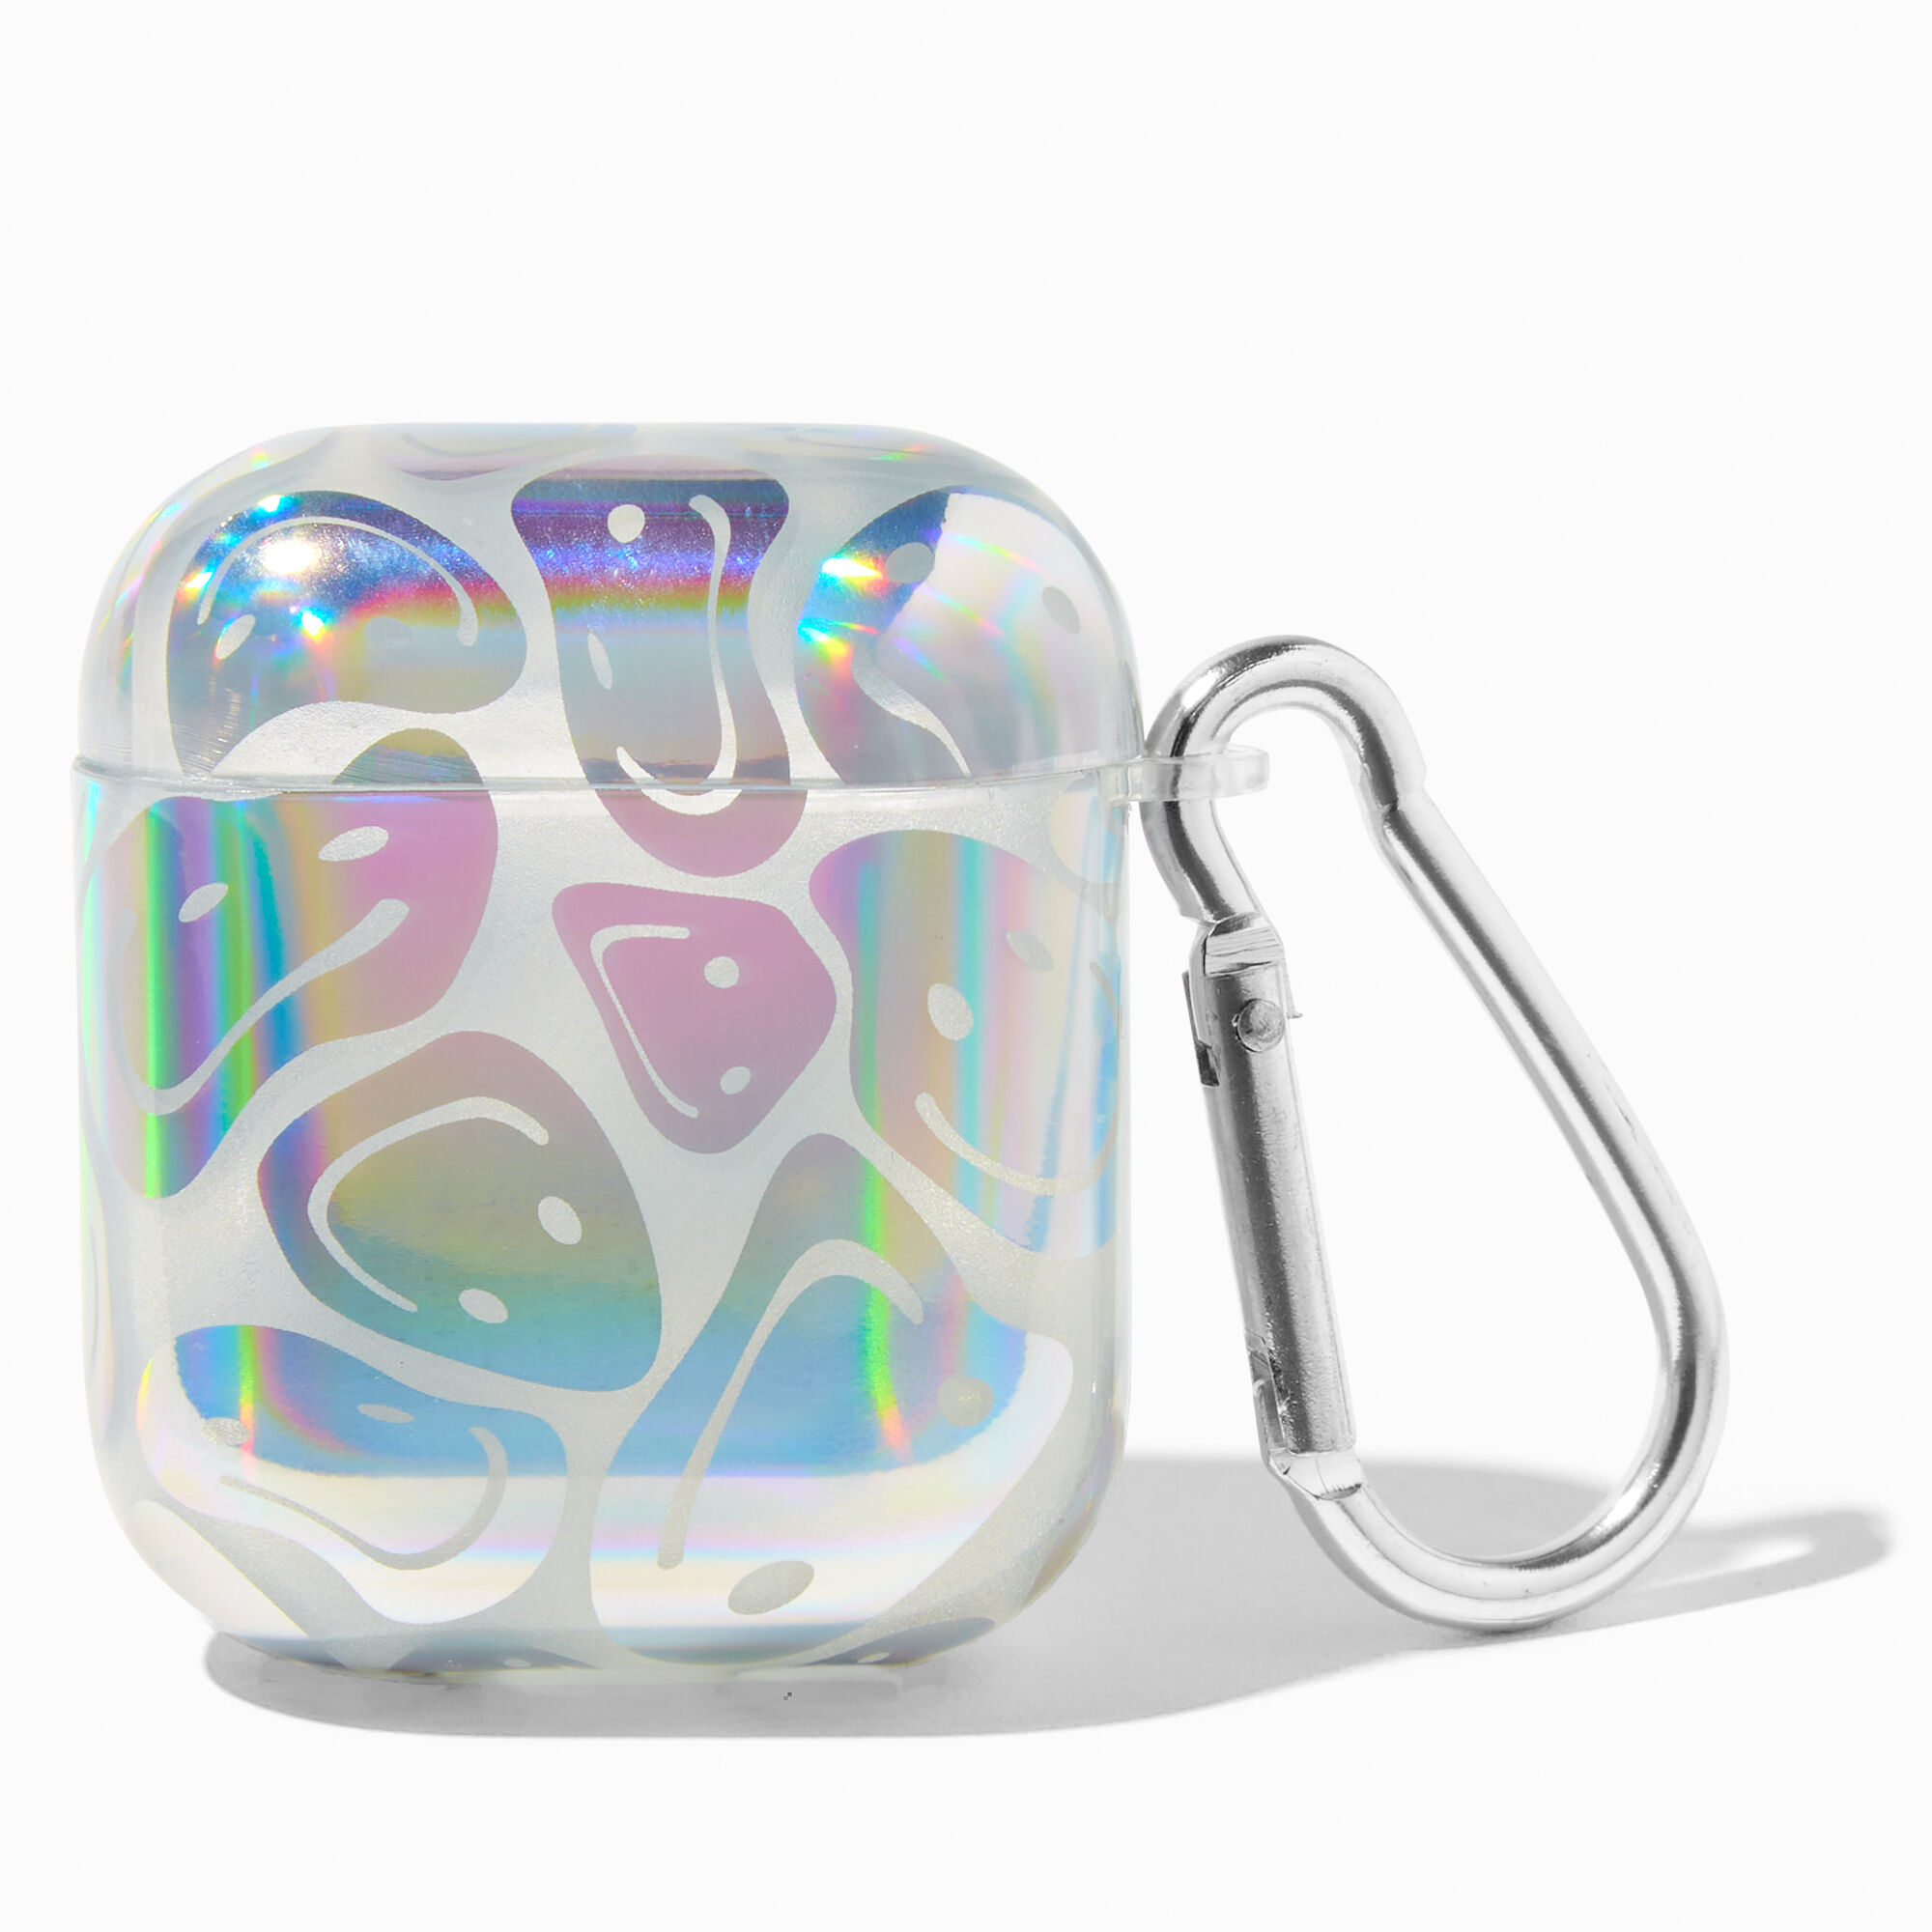 View Claires Wavy Happy Faces Holographic Earbud Case Cover Compatible With Apple Airpods Silver information